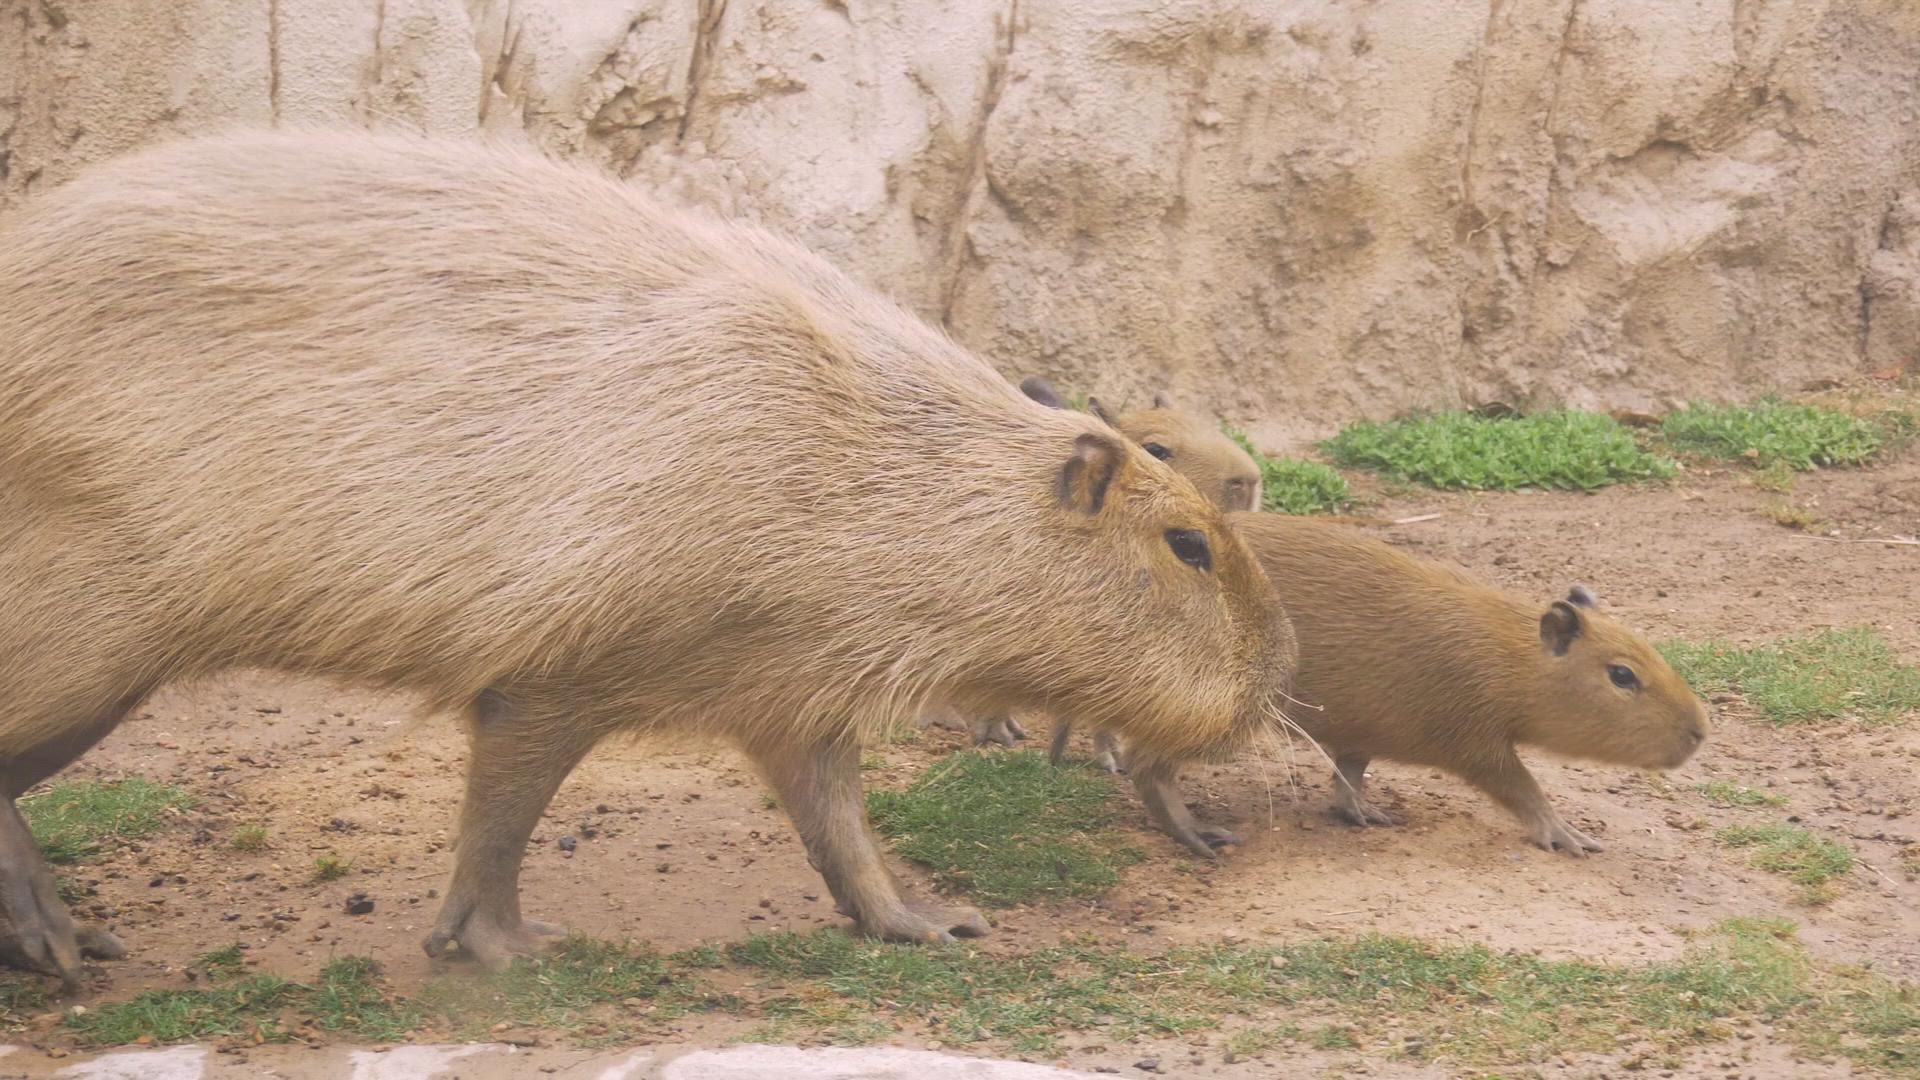 Bruno and Pepa are from the same rodent family as guinea pigs but they're 50 times bigger. In fact, capybaras are the world's largest rodent.